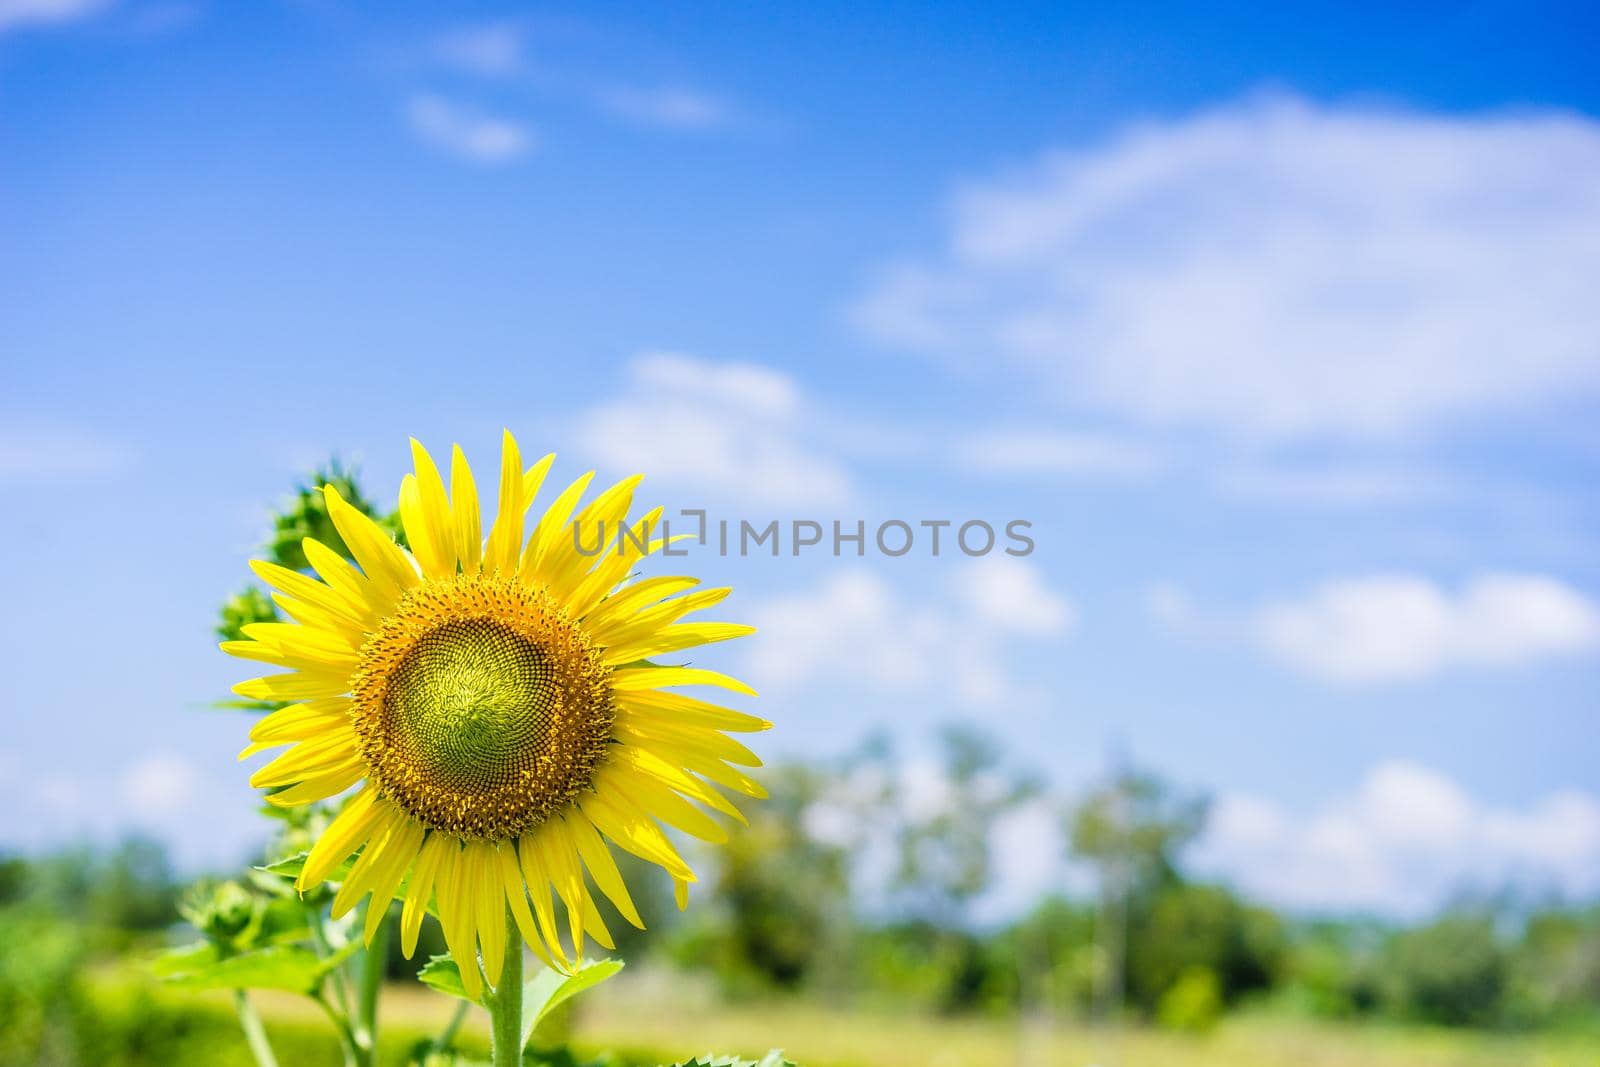 sunflower and blue sky in the garden by domonite